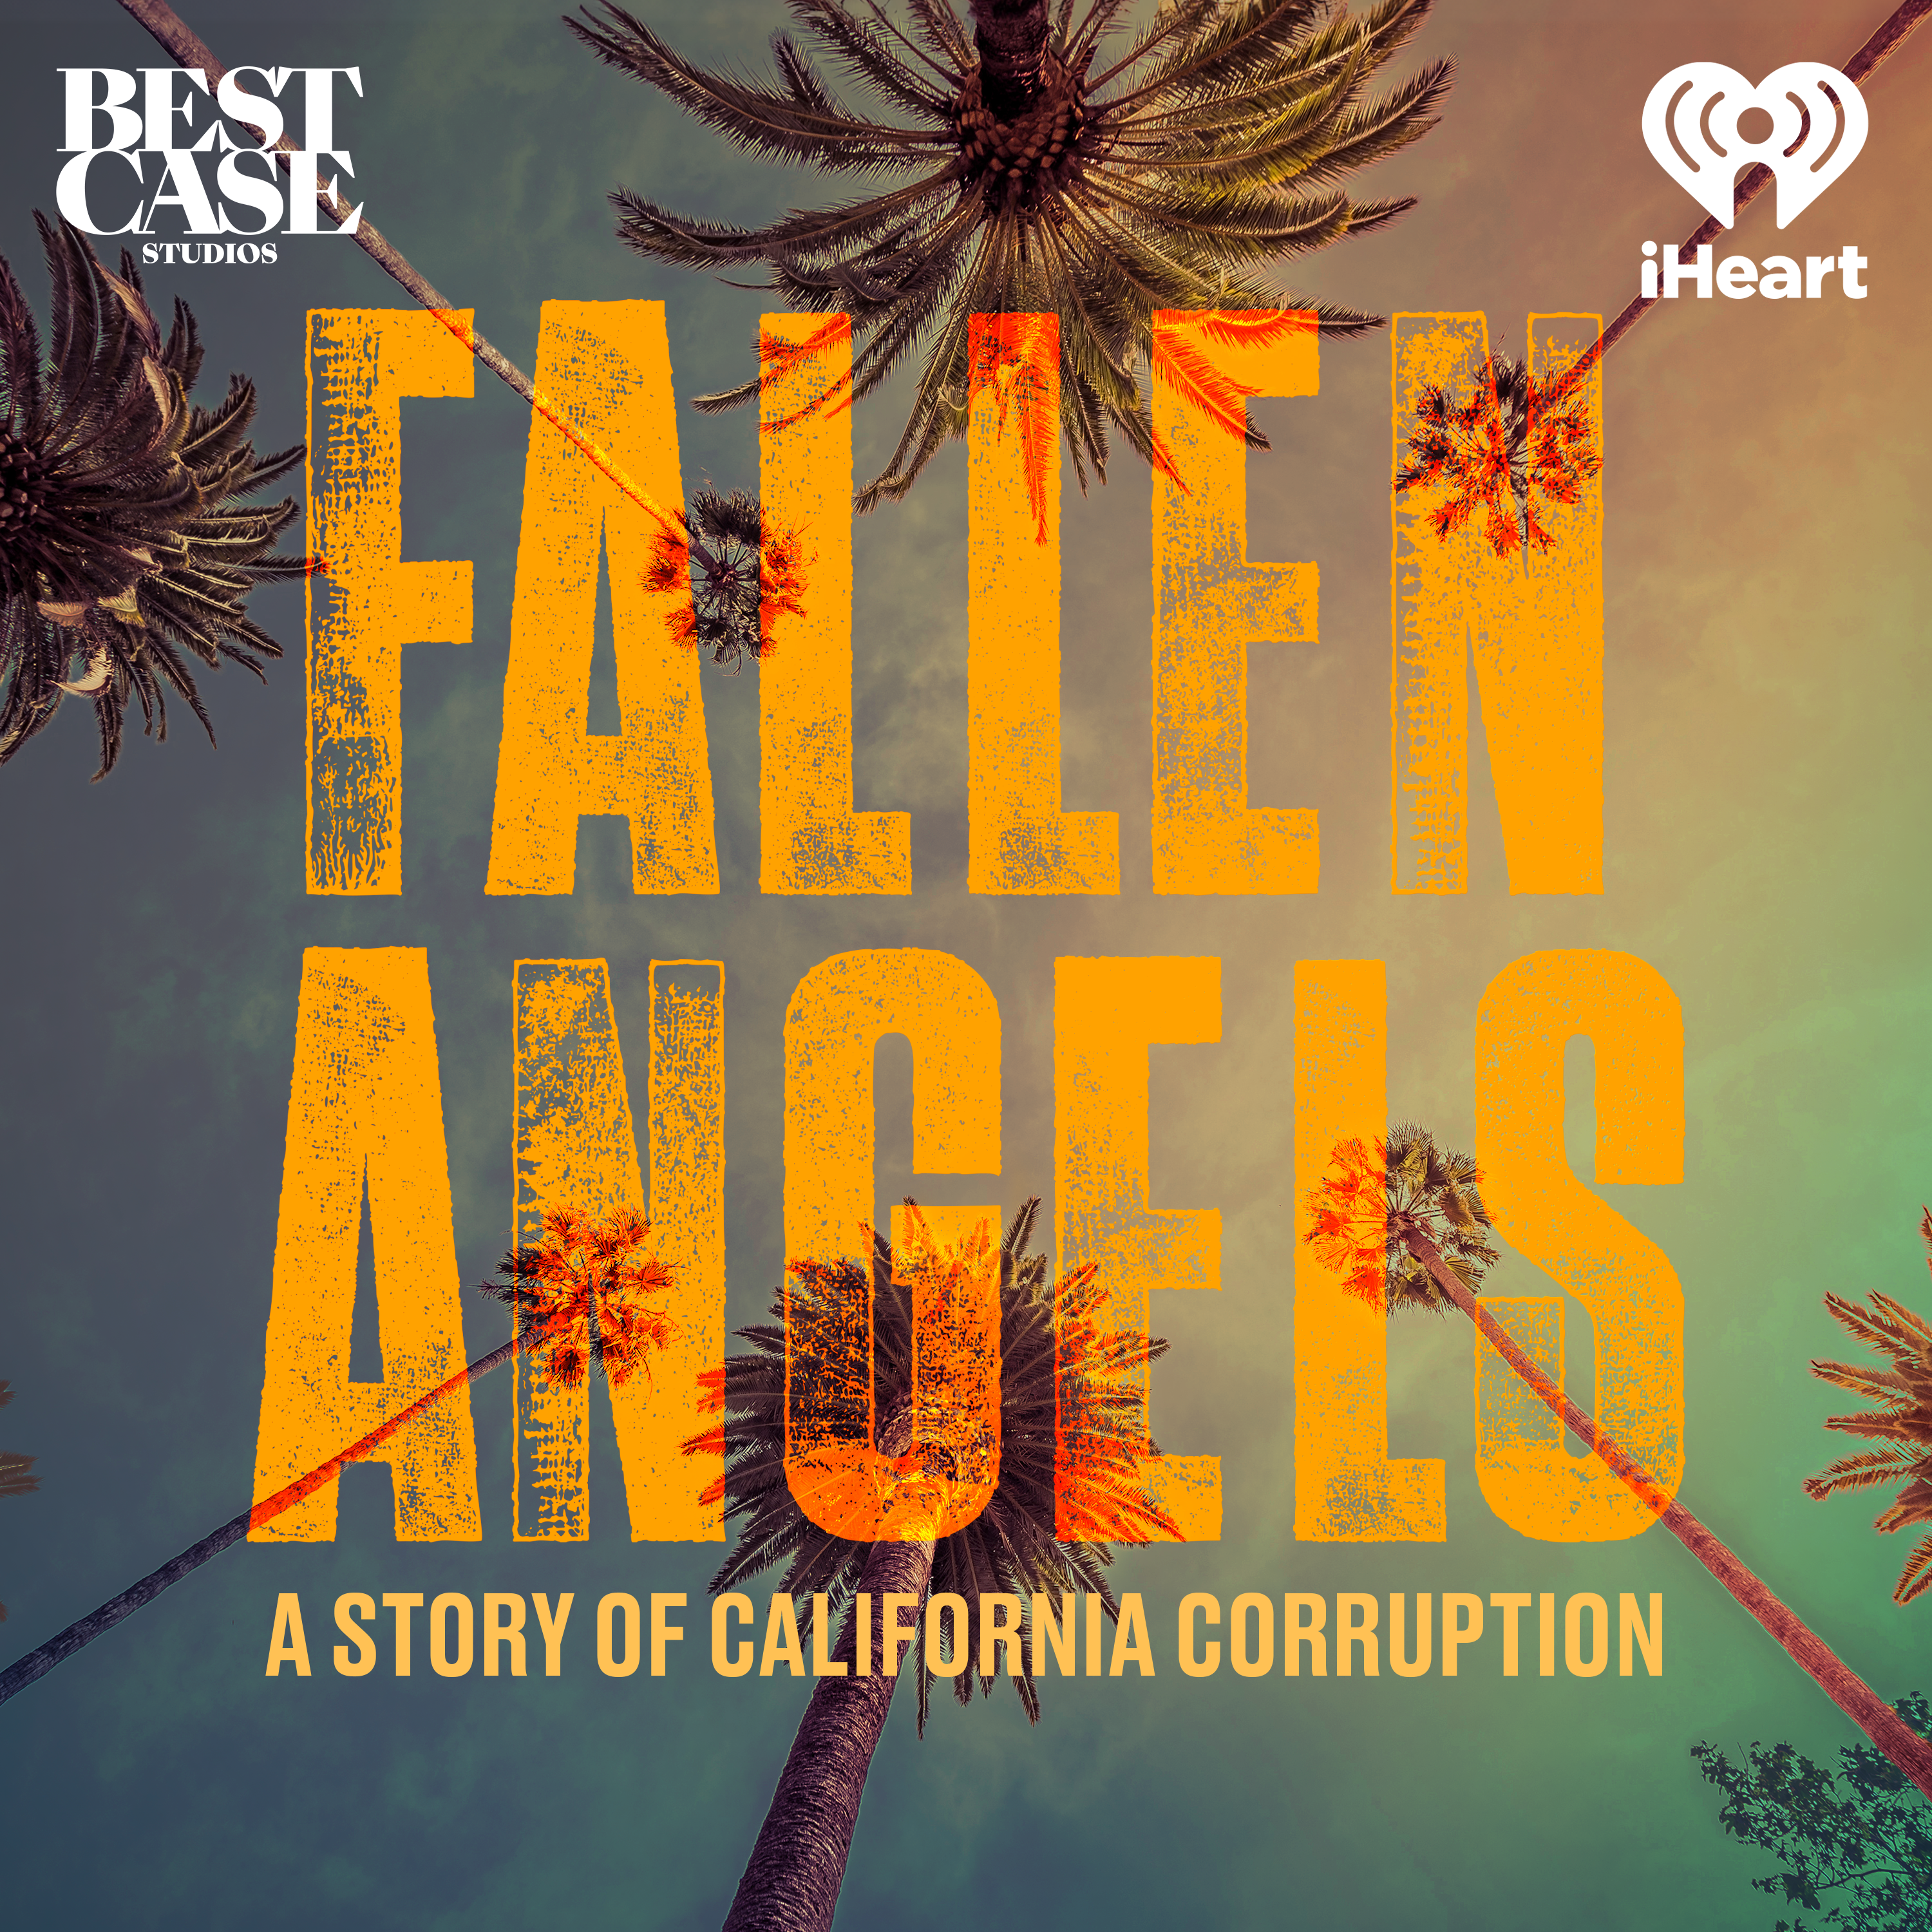 Introducing: Fallen Angels: A Story of California Corruption by iHeartPodcasts